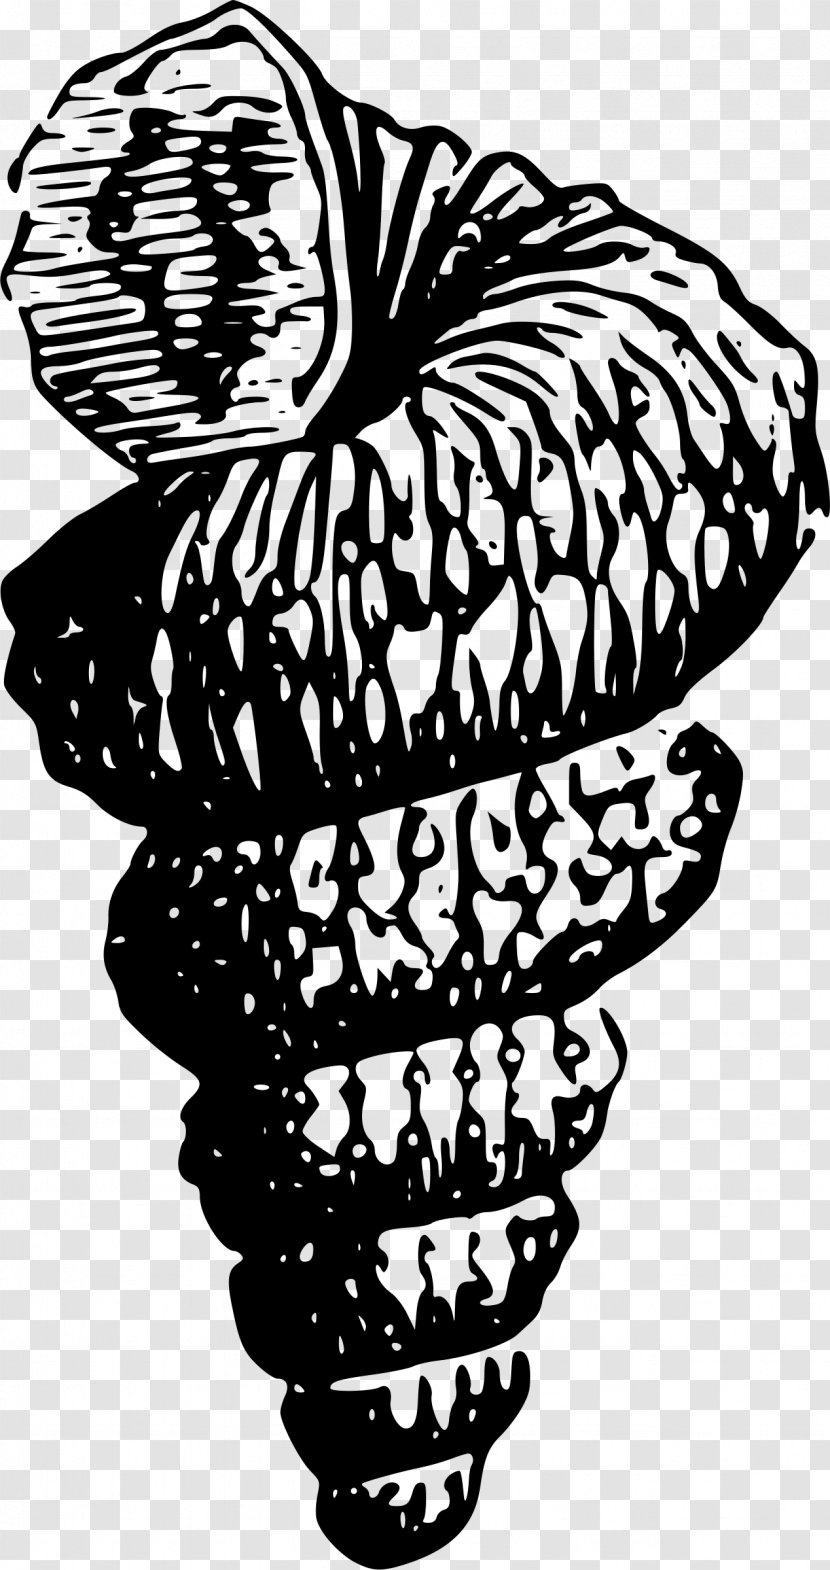 Black And White Clip Art - Organism - Seashell Transparent PNG